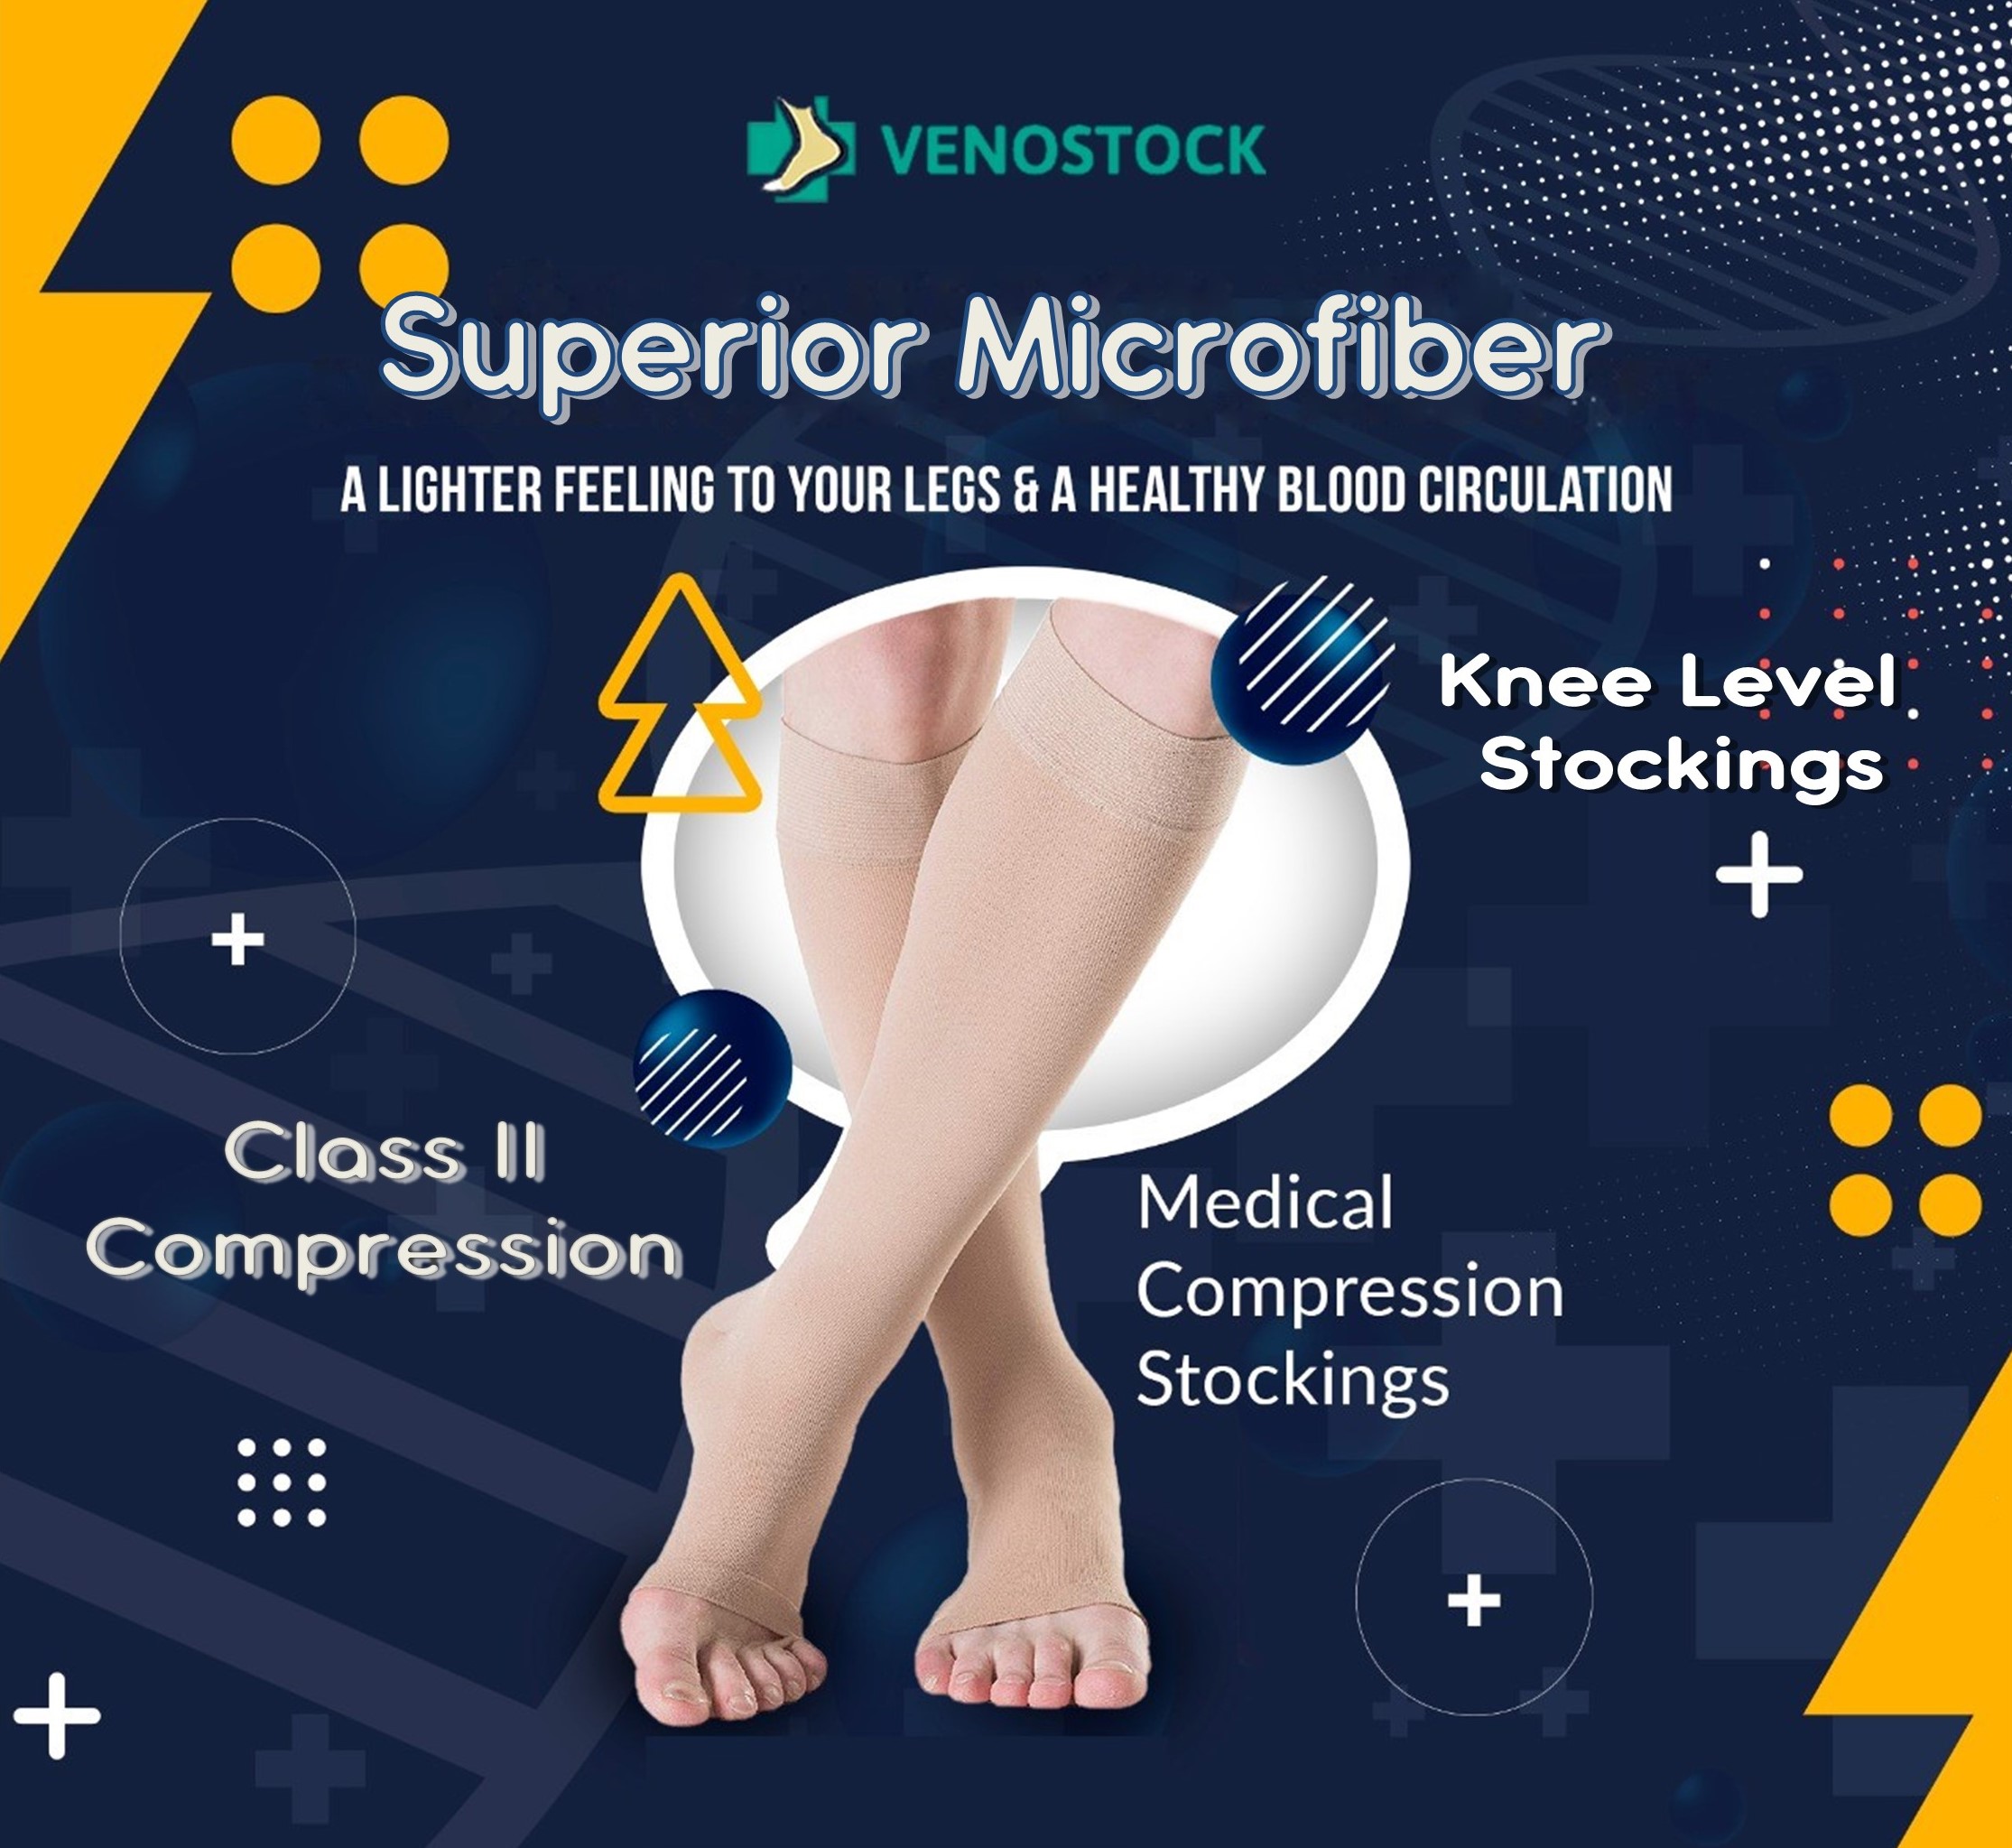 Findcool Medical Compression Pantyhose for Varicose Veins